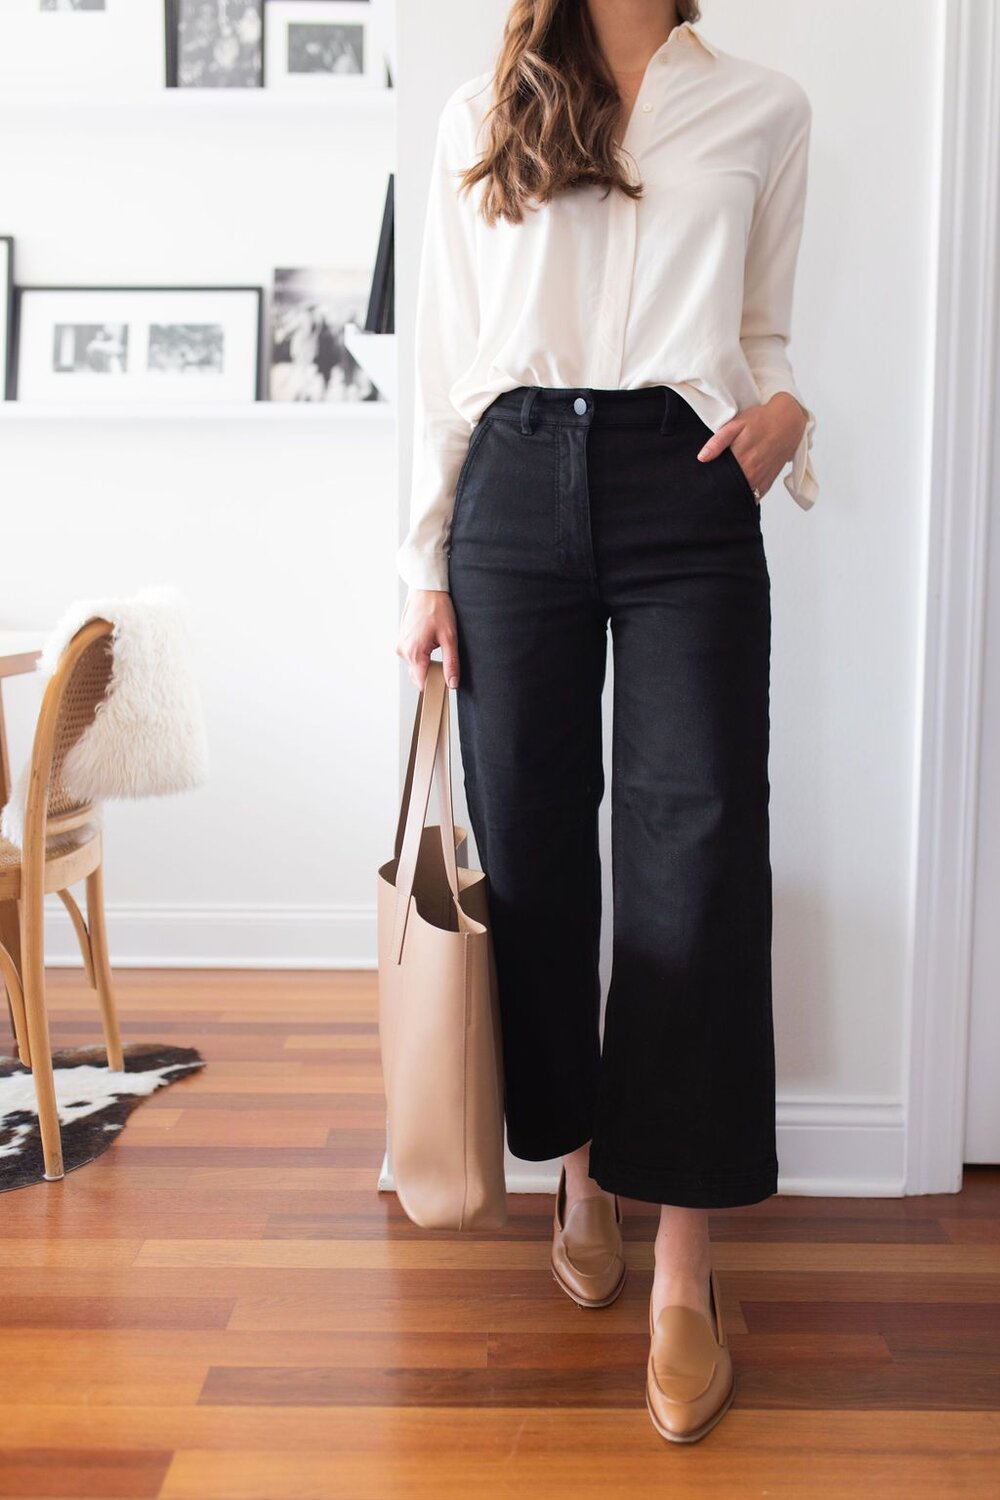 Everlane Fall Wardrobe | 13 Outfits To War From Work To Weekend.jpg